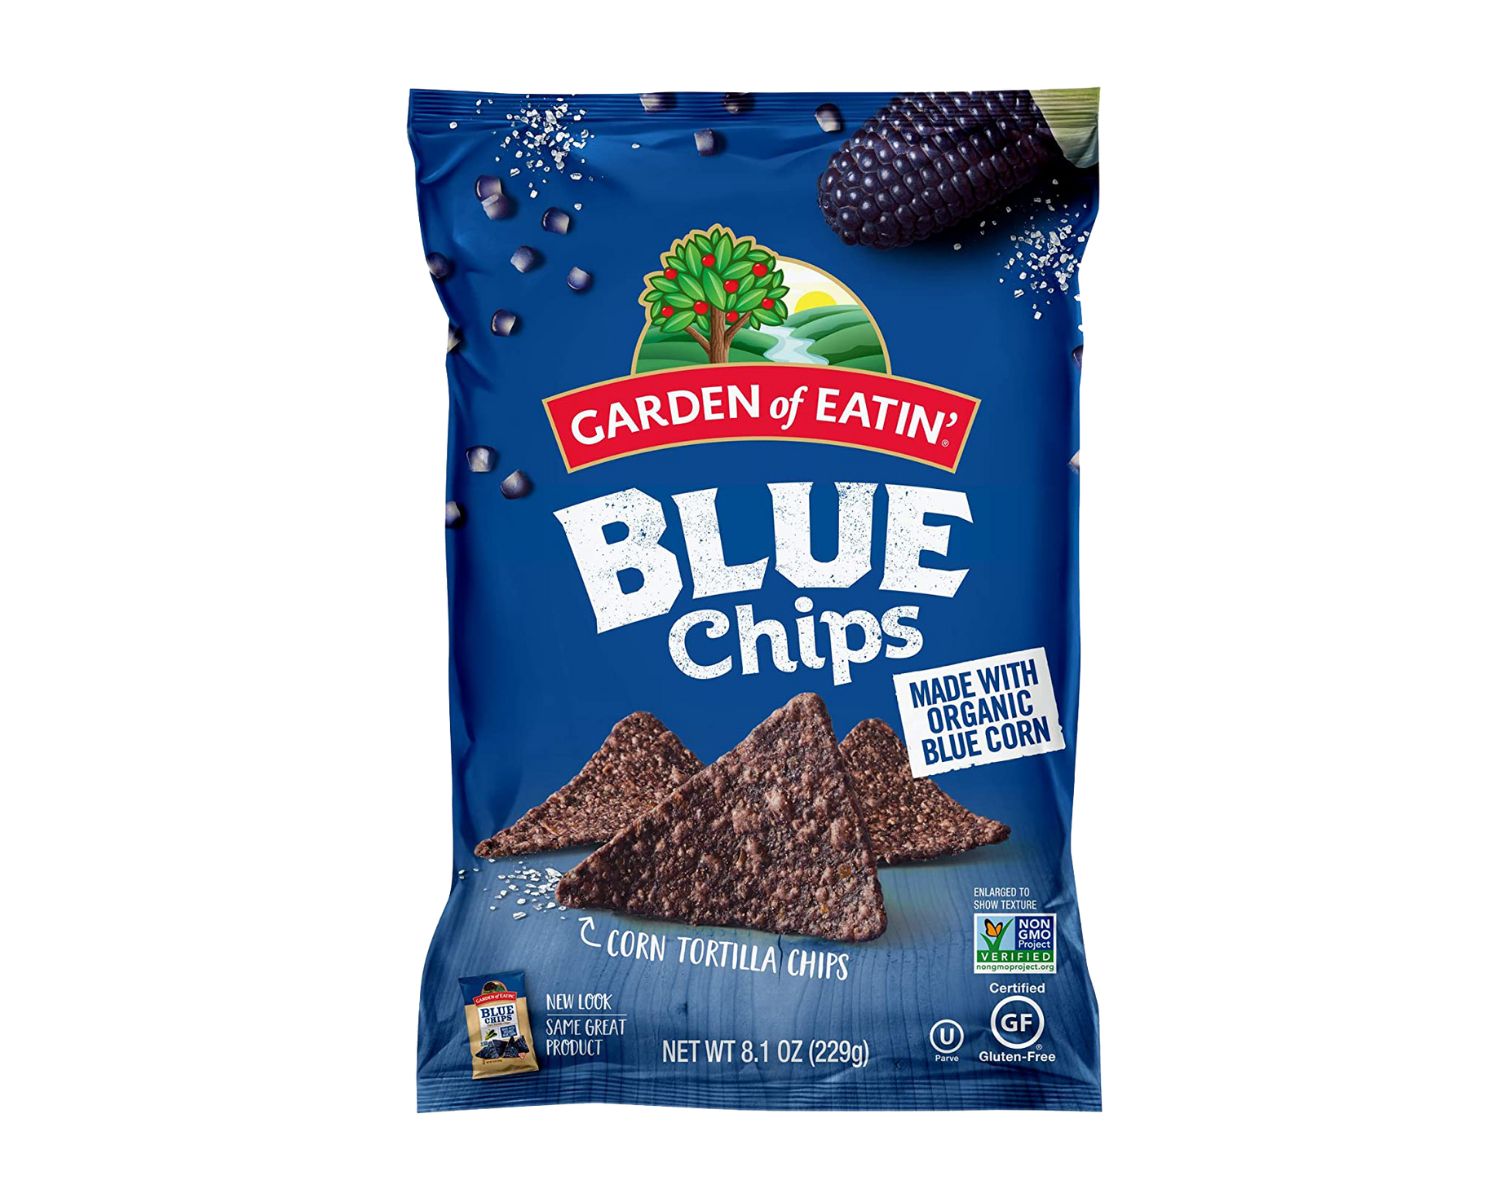 20-garden-of-eatin-blue-chips-nutrition-facts